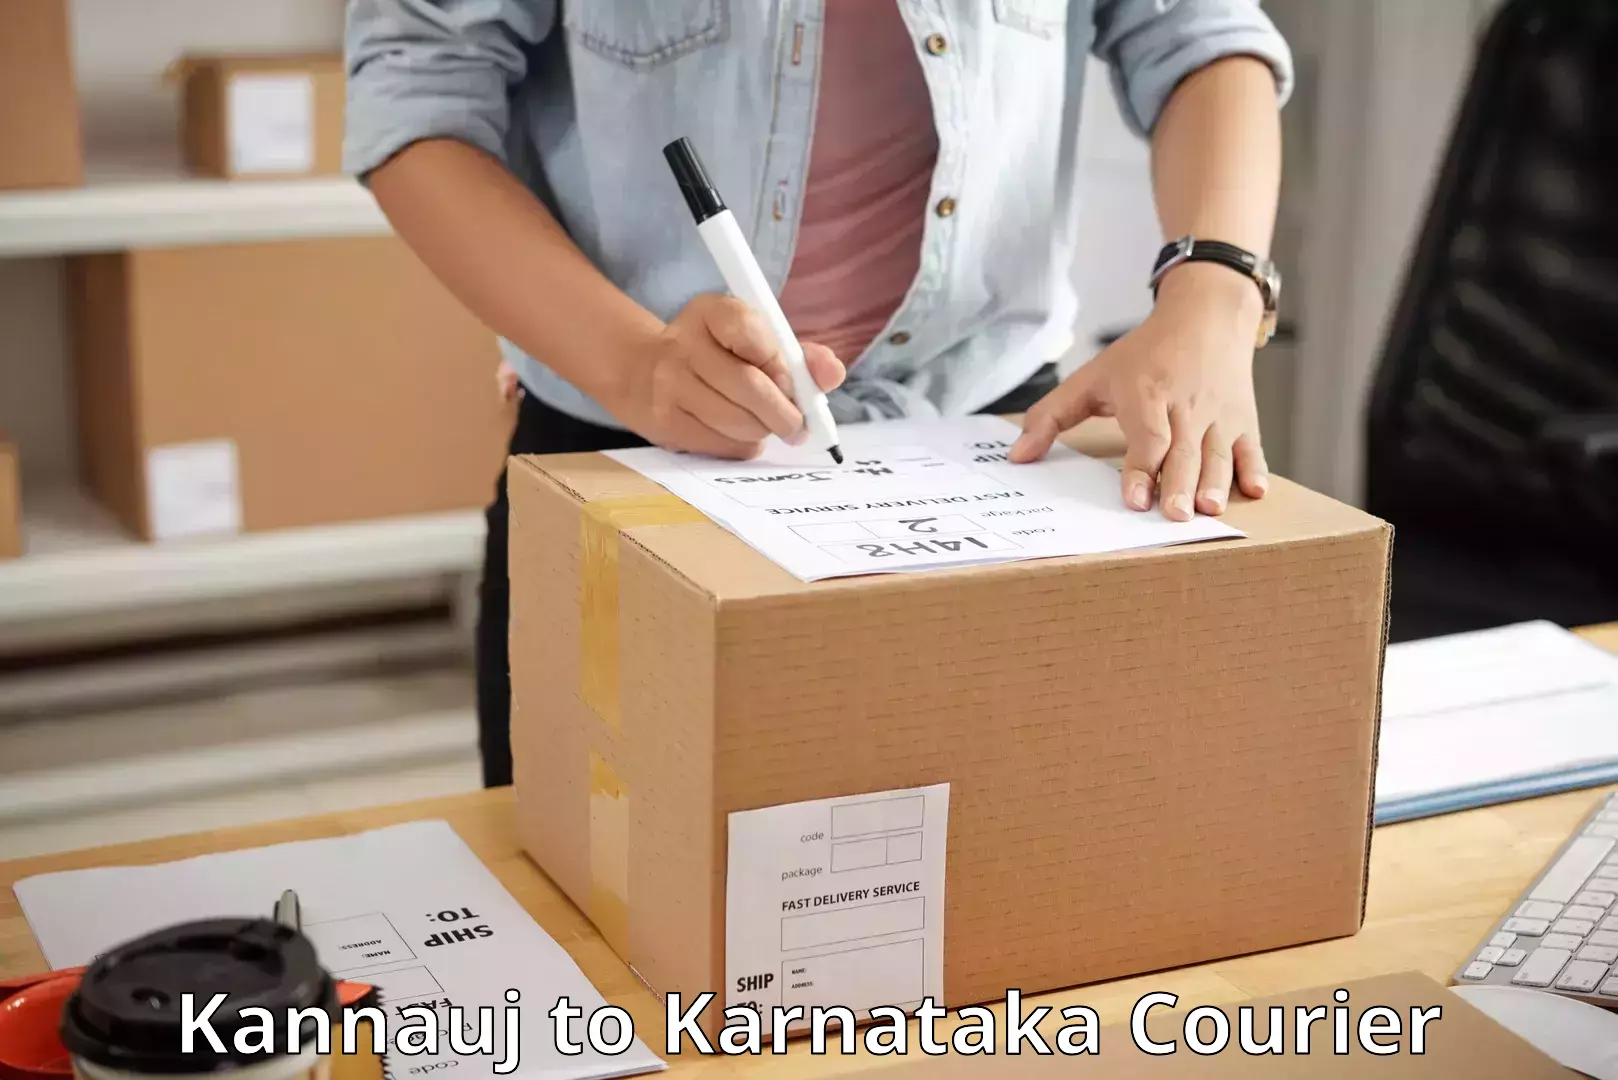 State-of-the-art courier technology Kannauj to Mangalore Port